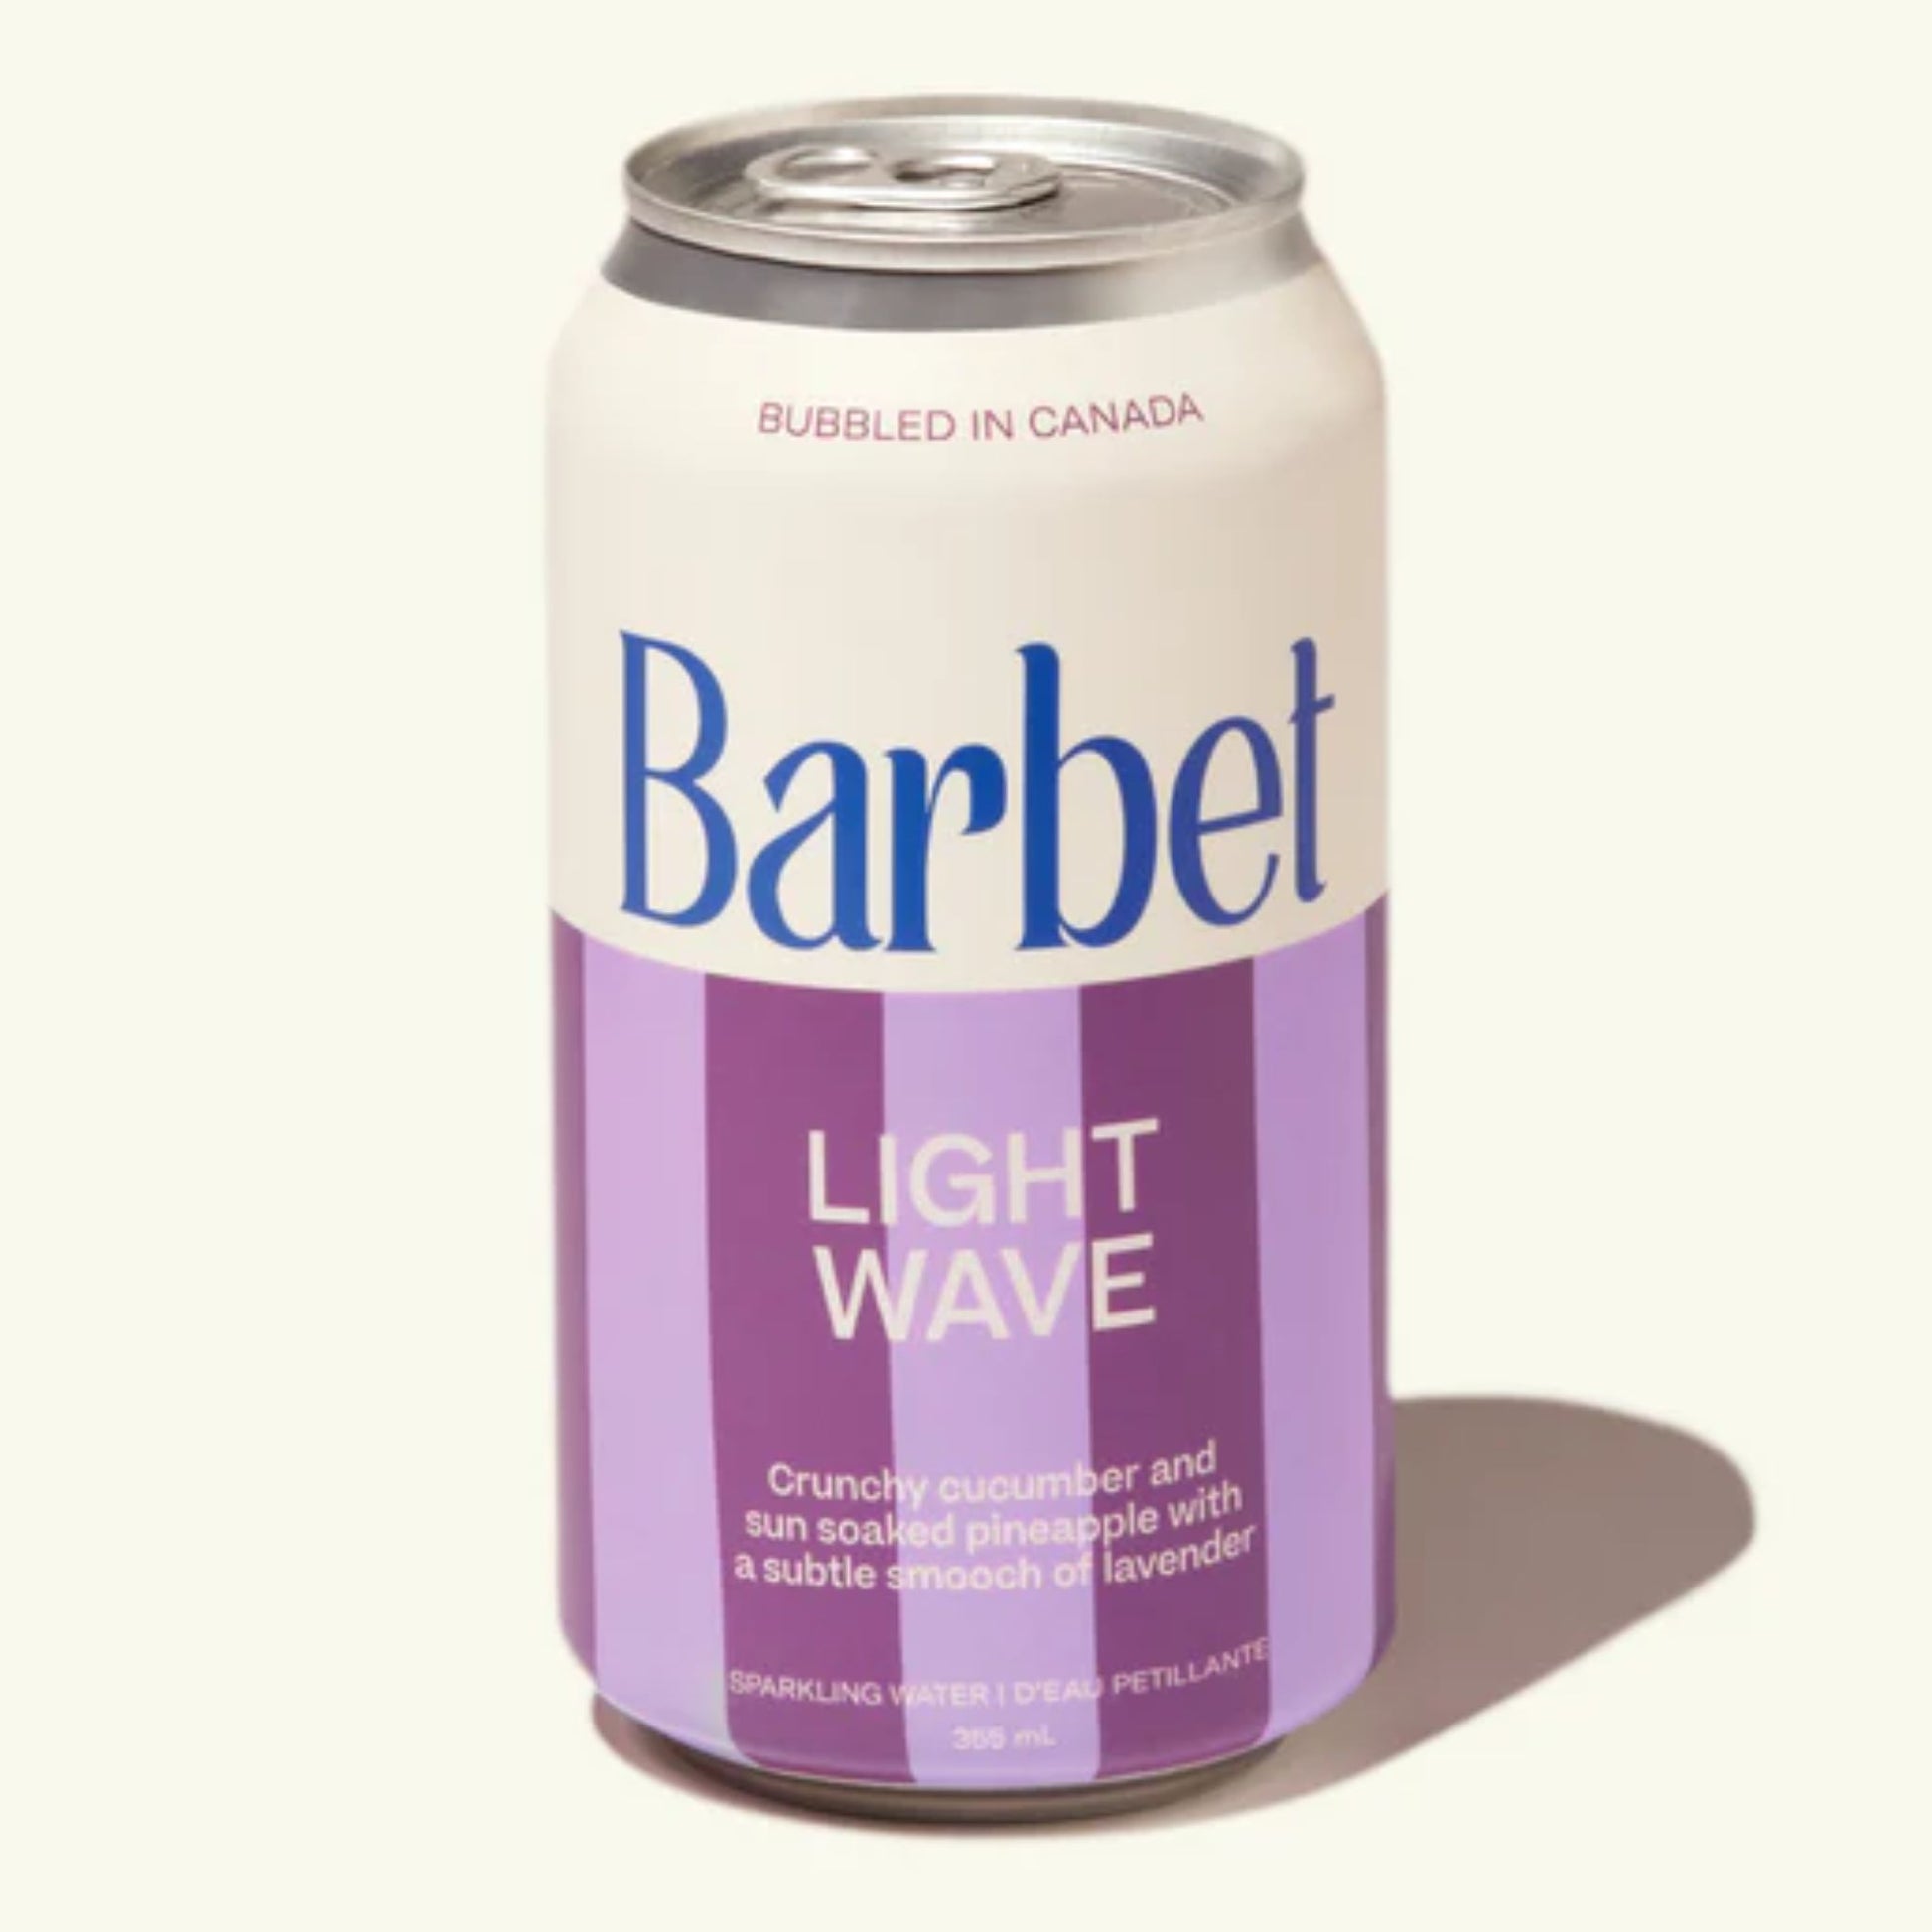 Barbet Light Wave is available for sale at Knyota Drinks in Ottawa.